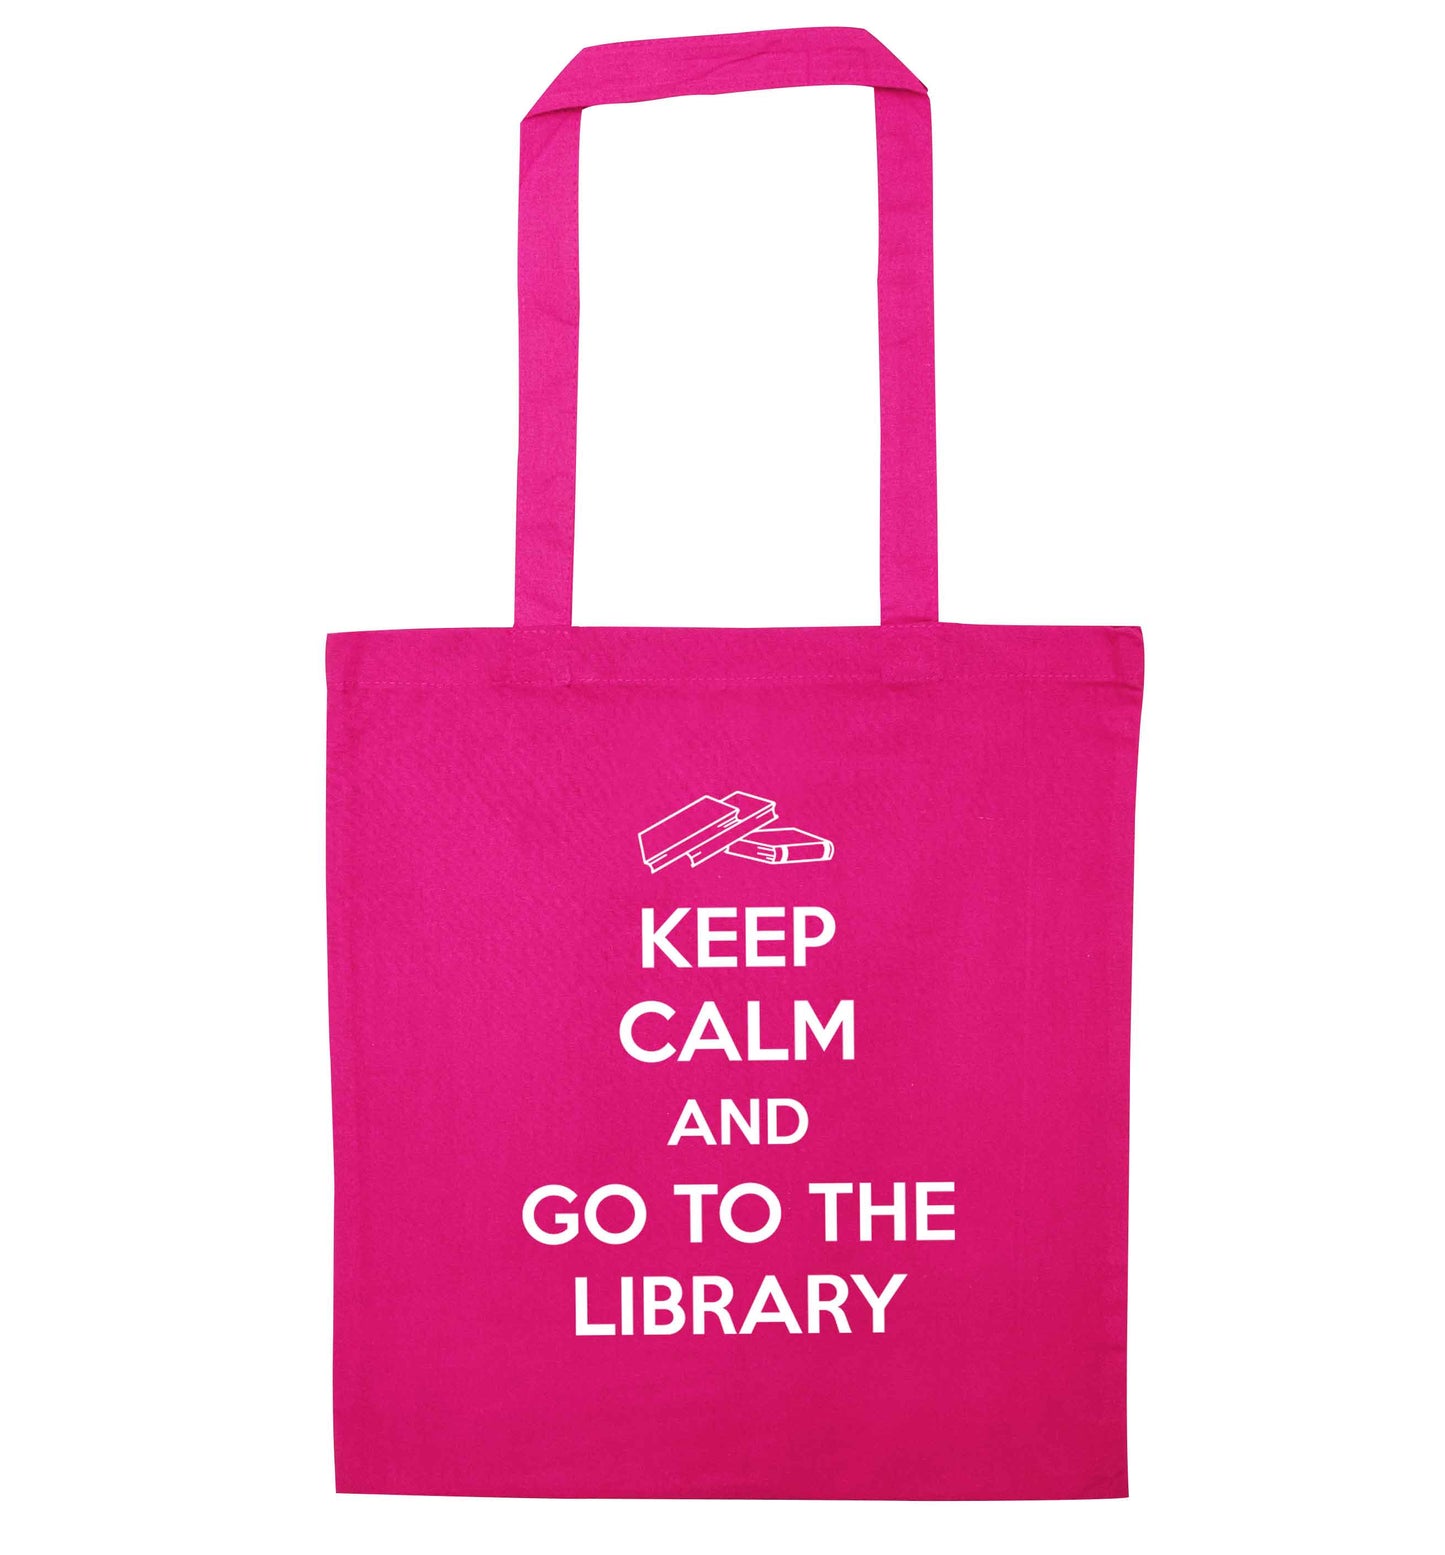 Keep calm and go to the library pink tote bag